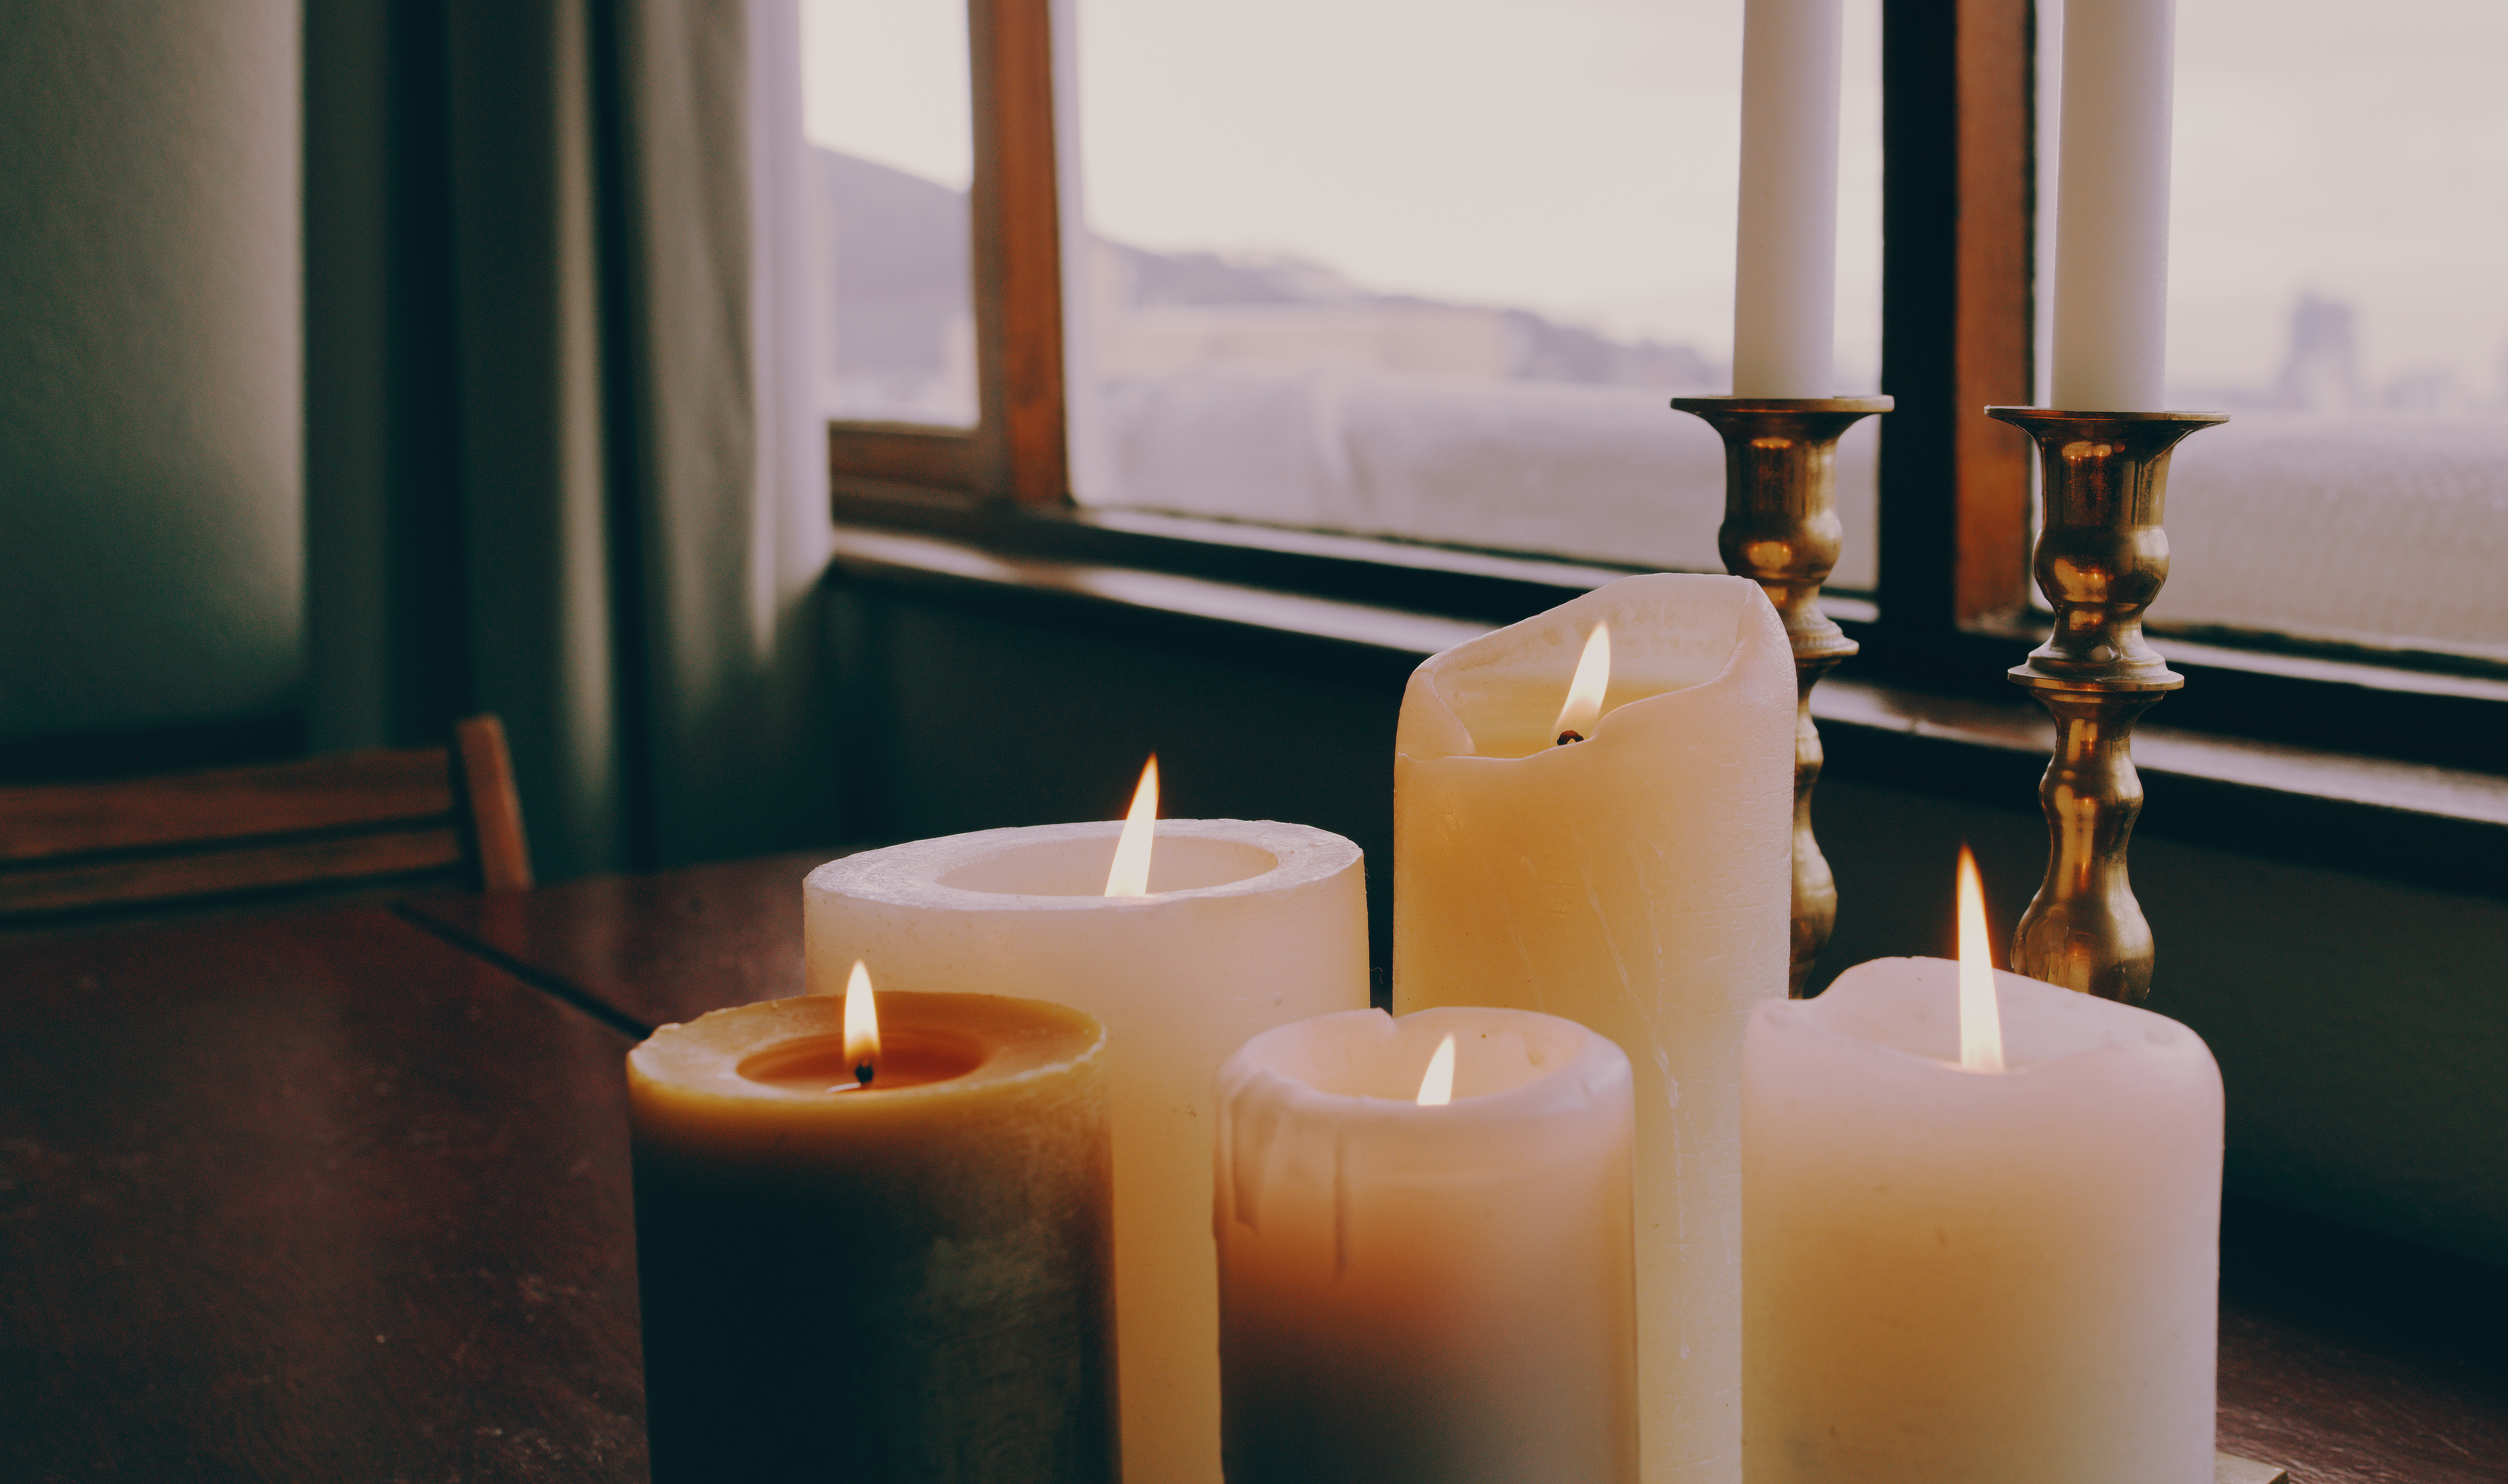 Five lit candles of varying heights on a surface near a window with a view of distant hills